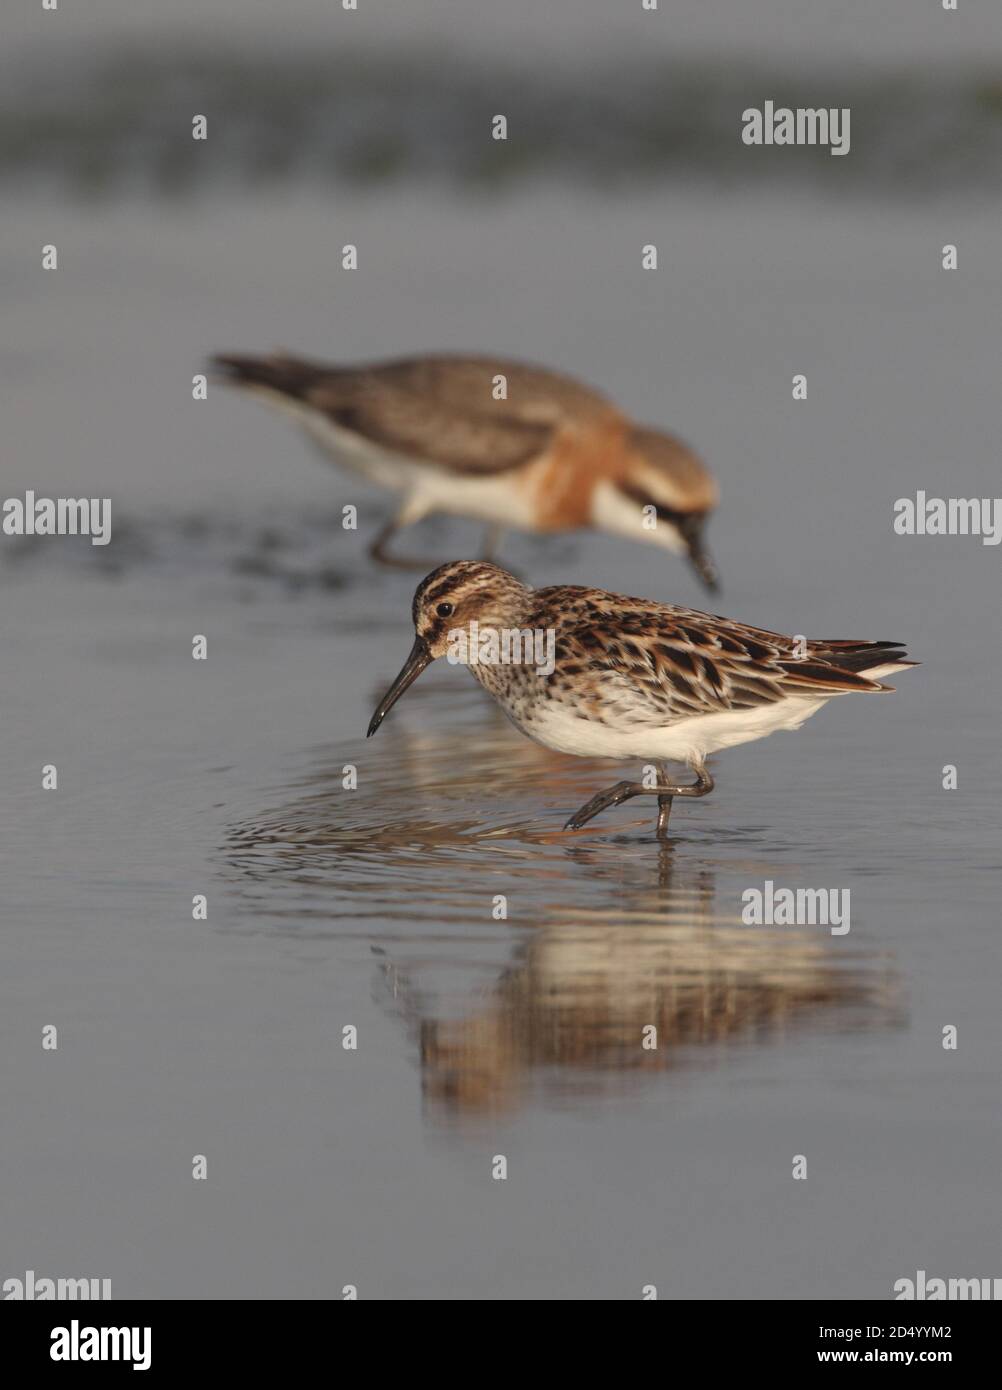 Eastern broad-billed sandpiper (Calidris falcinellus sibiricus, Limicola falcinellus sibirica), in water, in summer plumage, Plover in background, Stock Photo